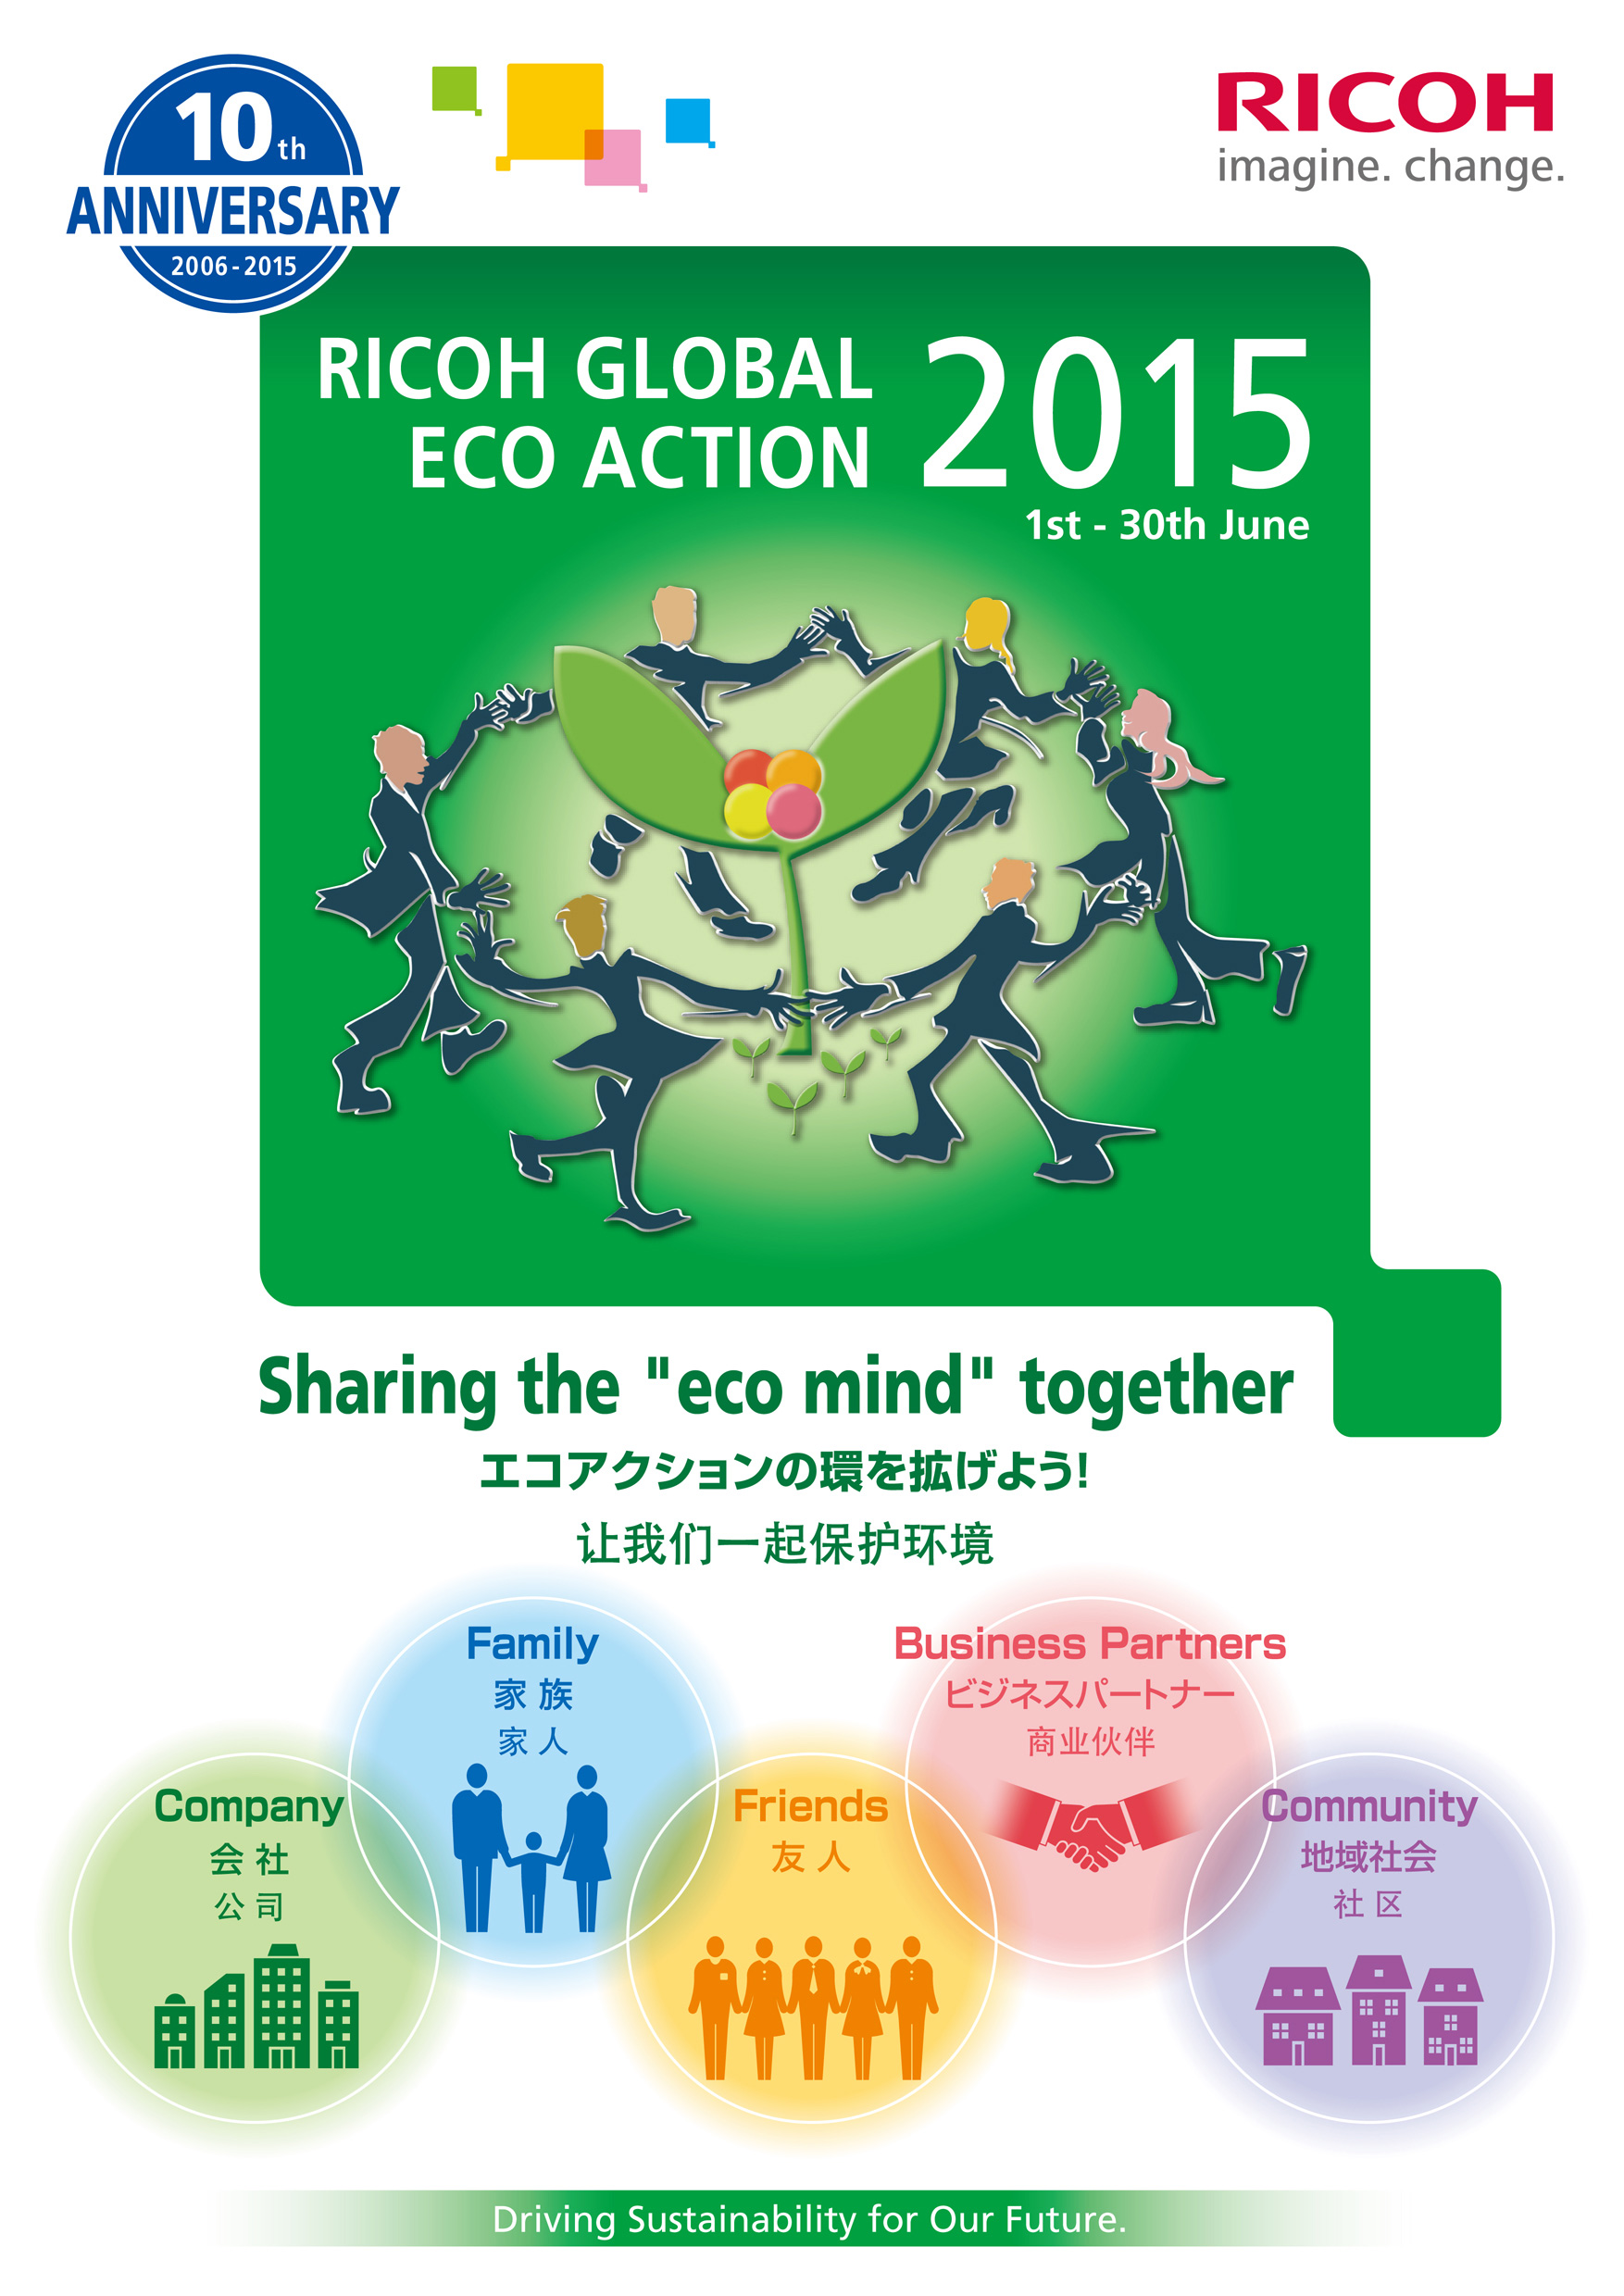 image:Poster for Ricoh Global Eco Action 2015